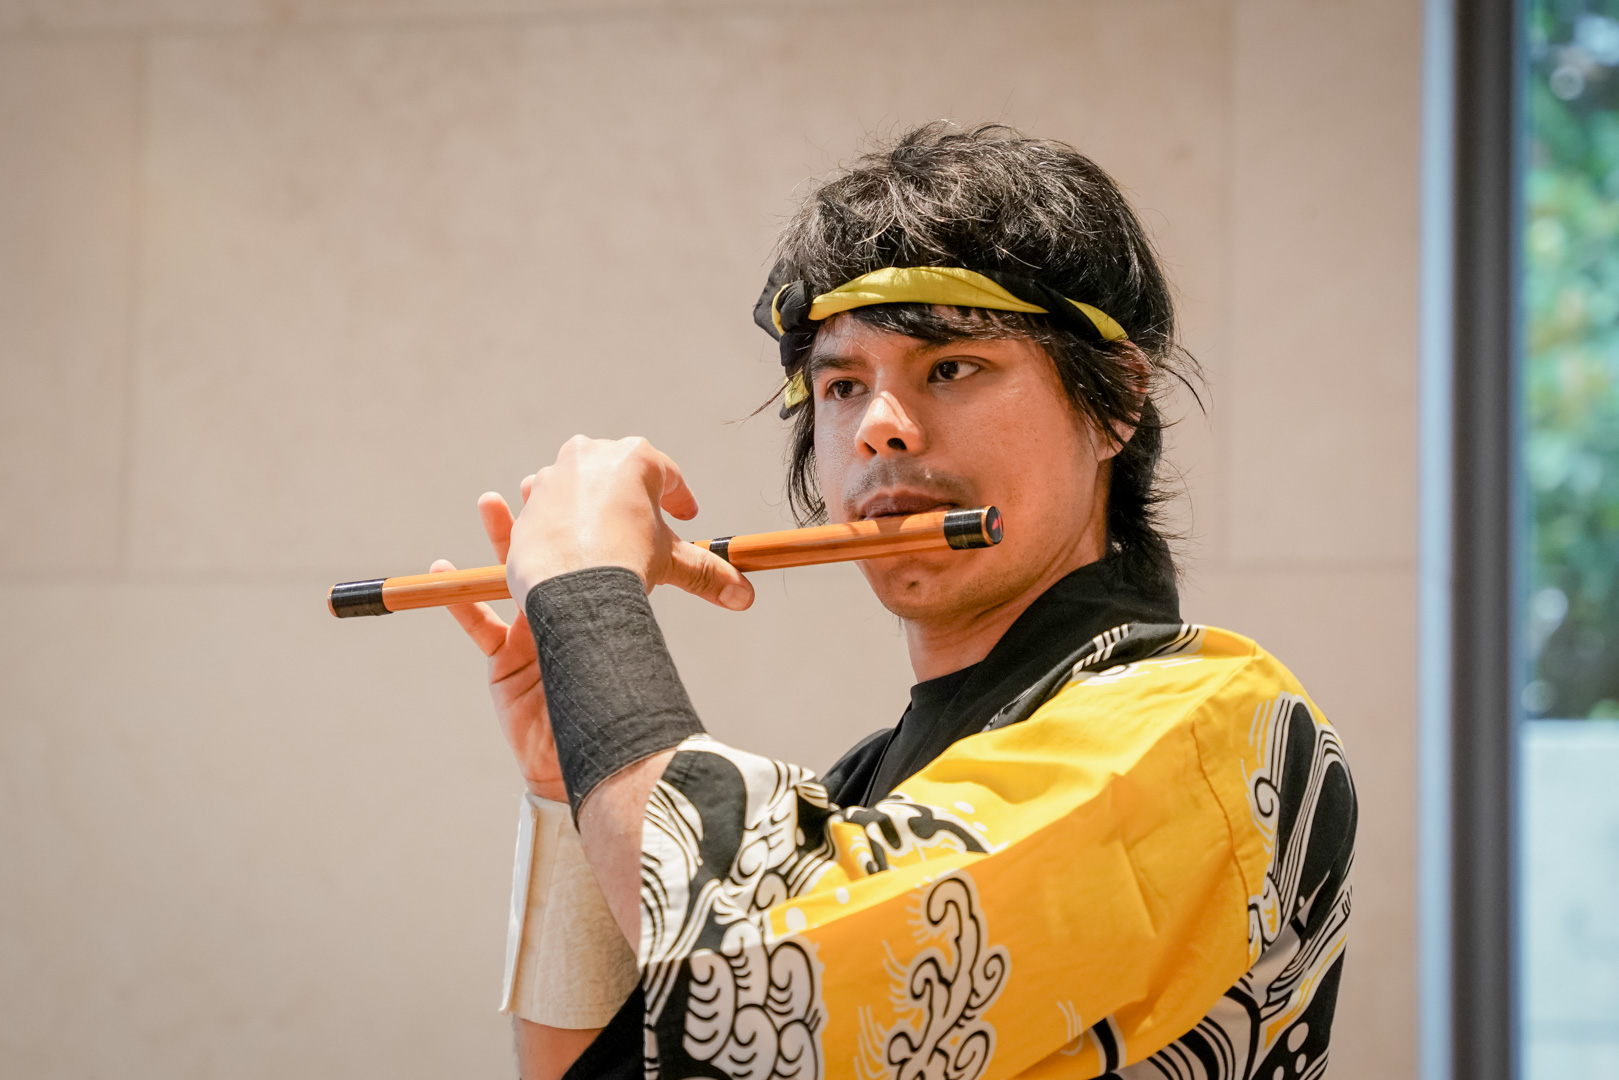 A young man plays a wooden flute